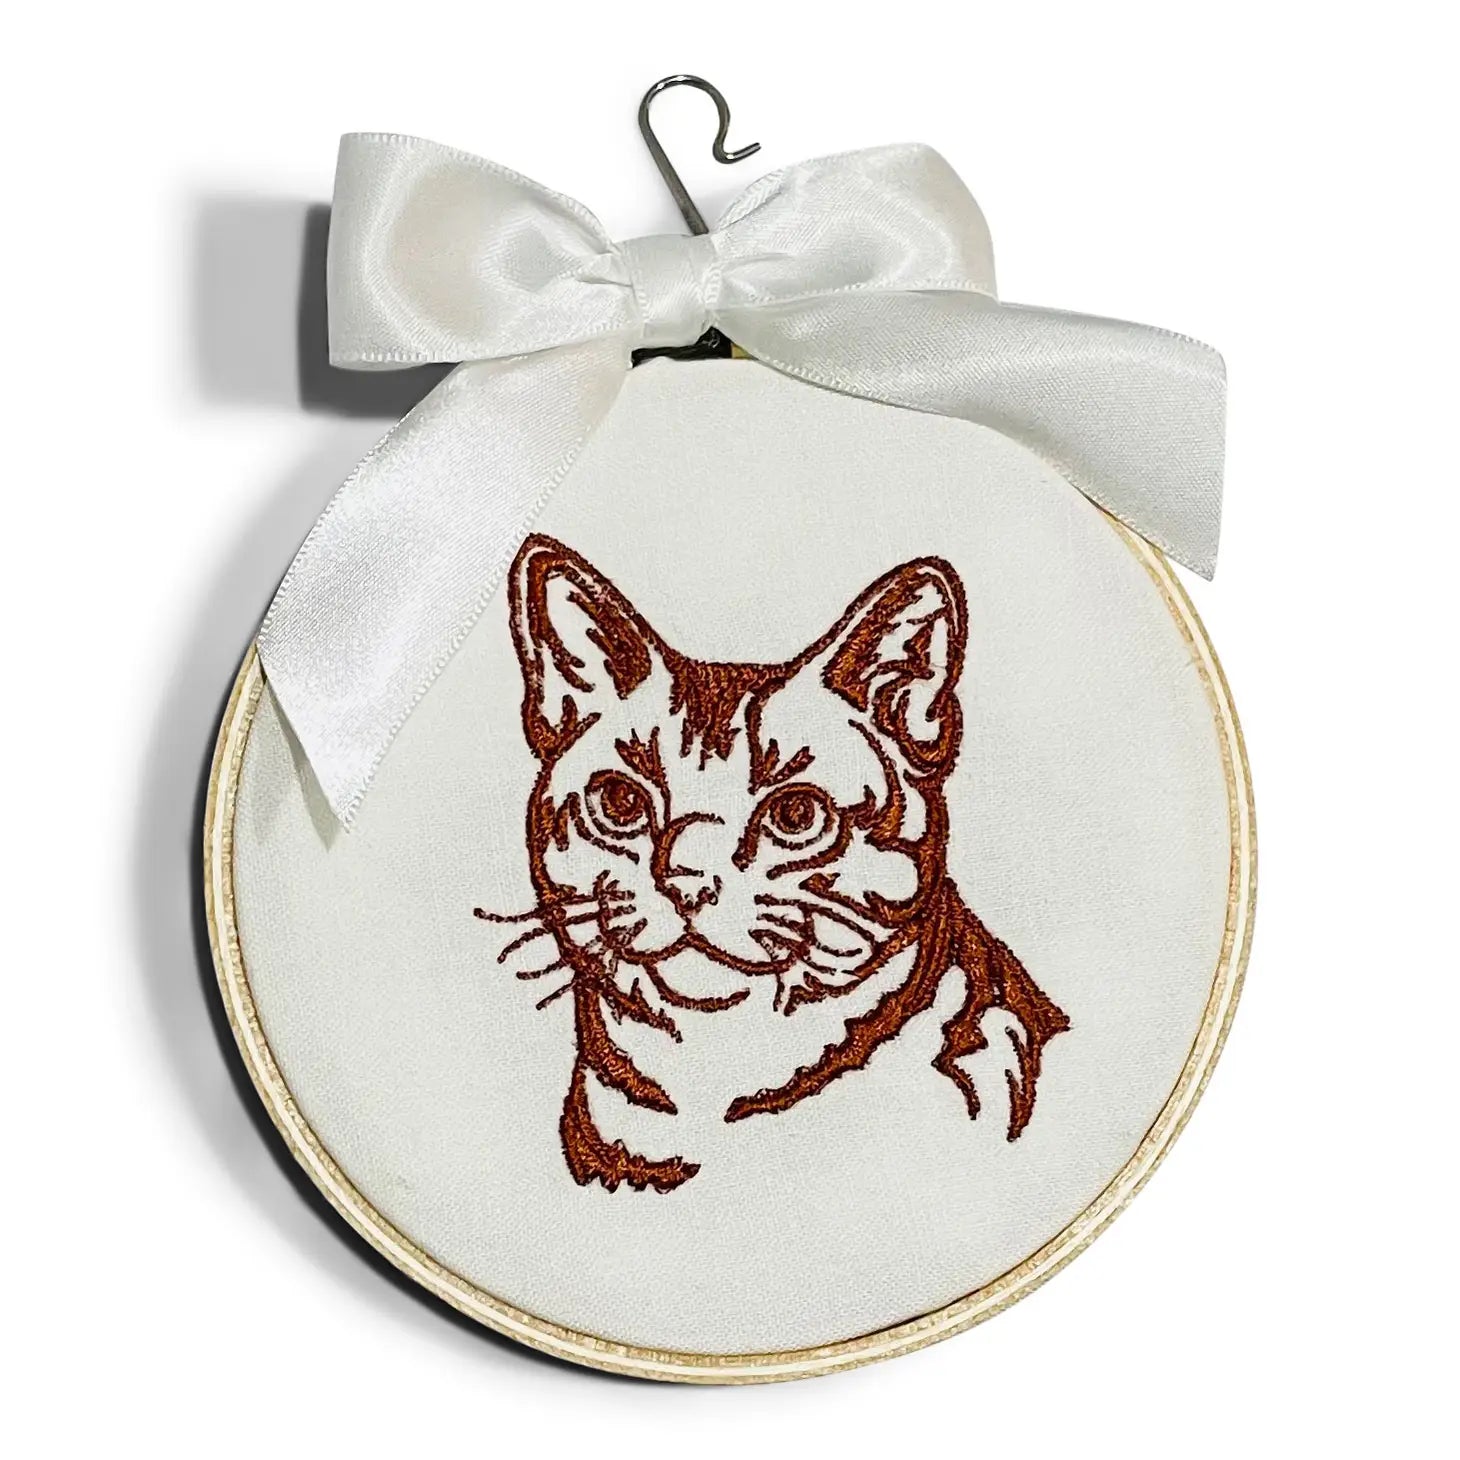 Embroidered Ornaments by Vibrantly Blue